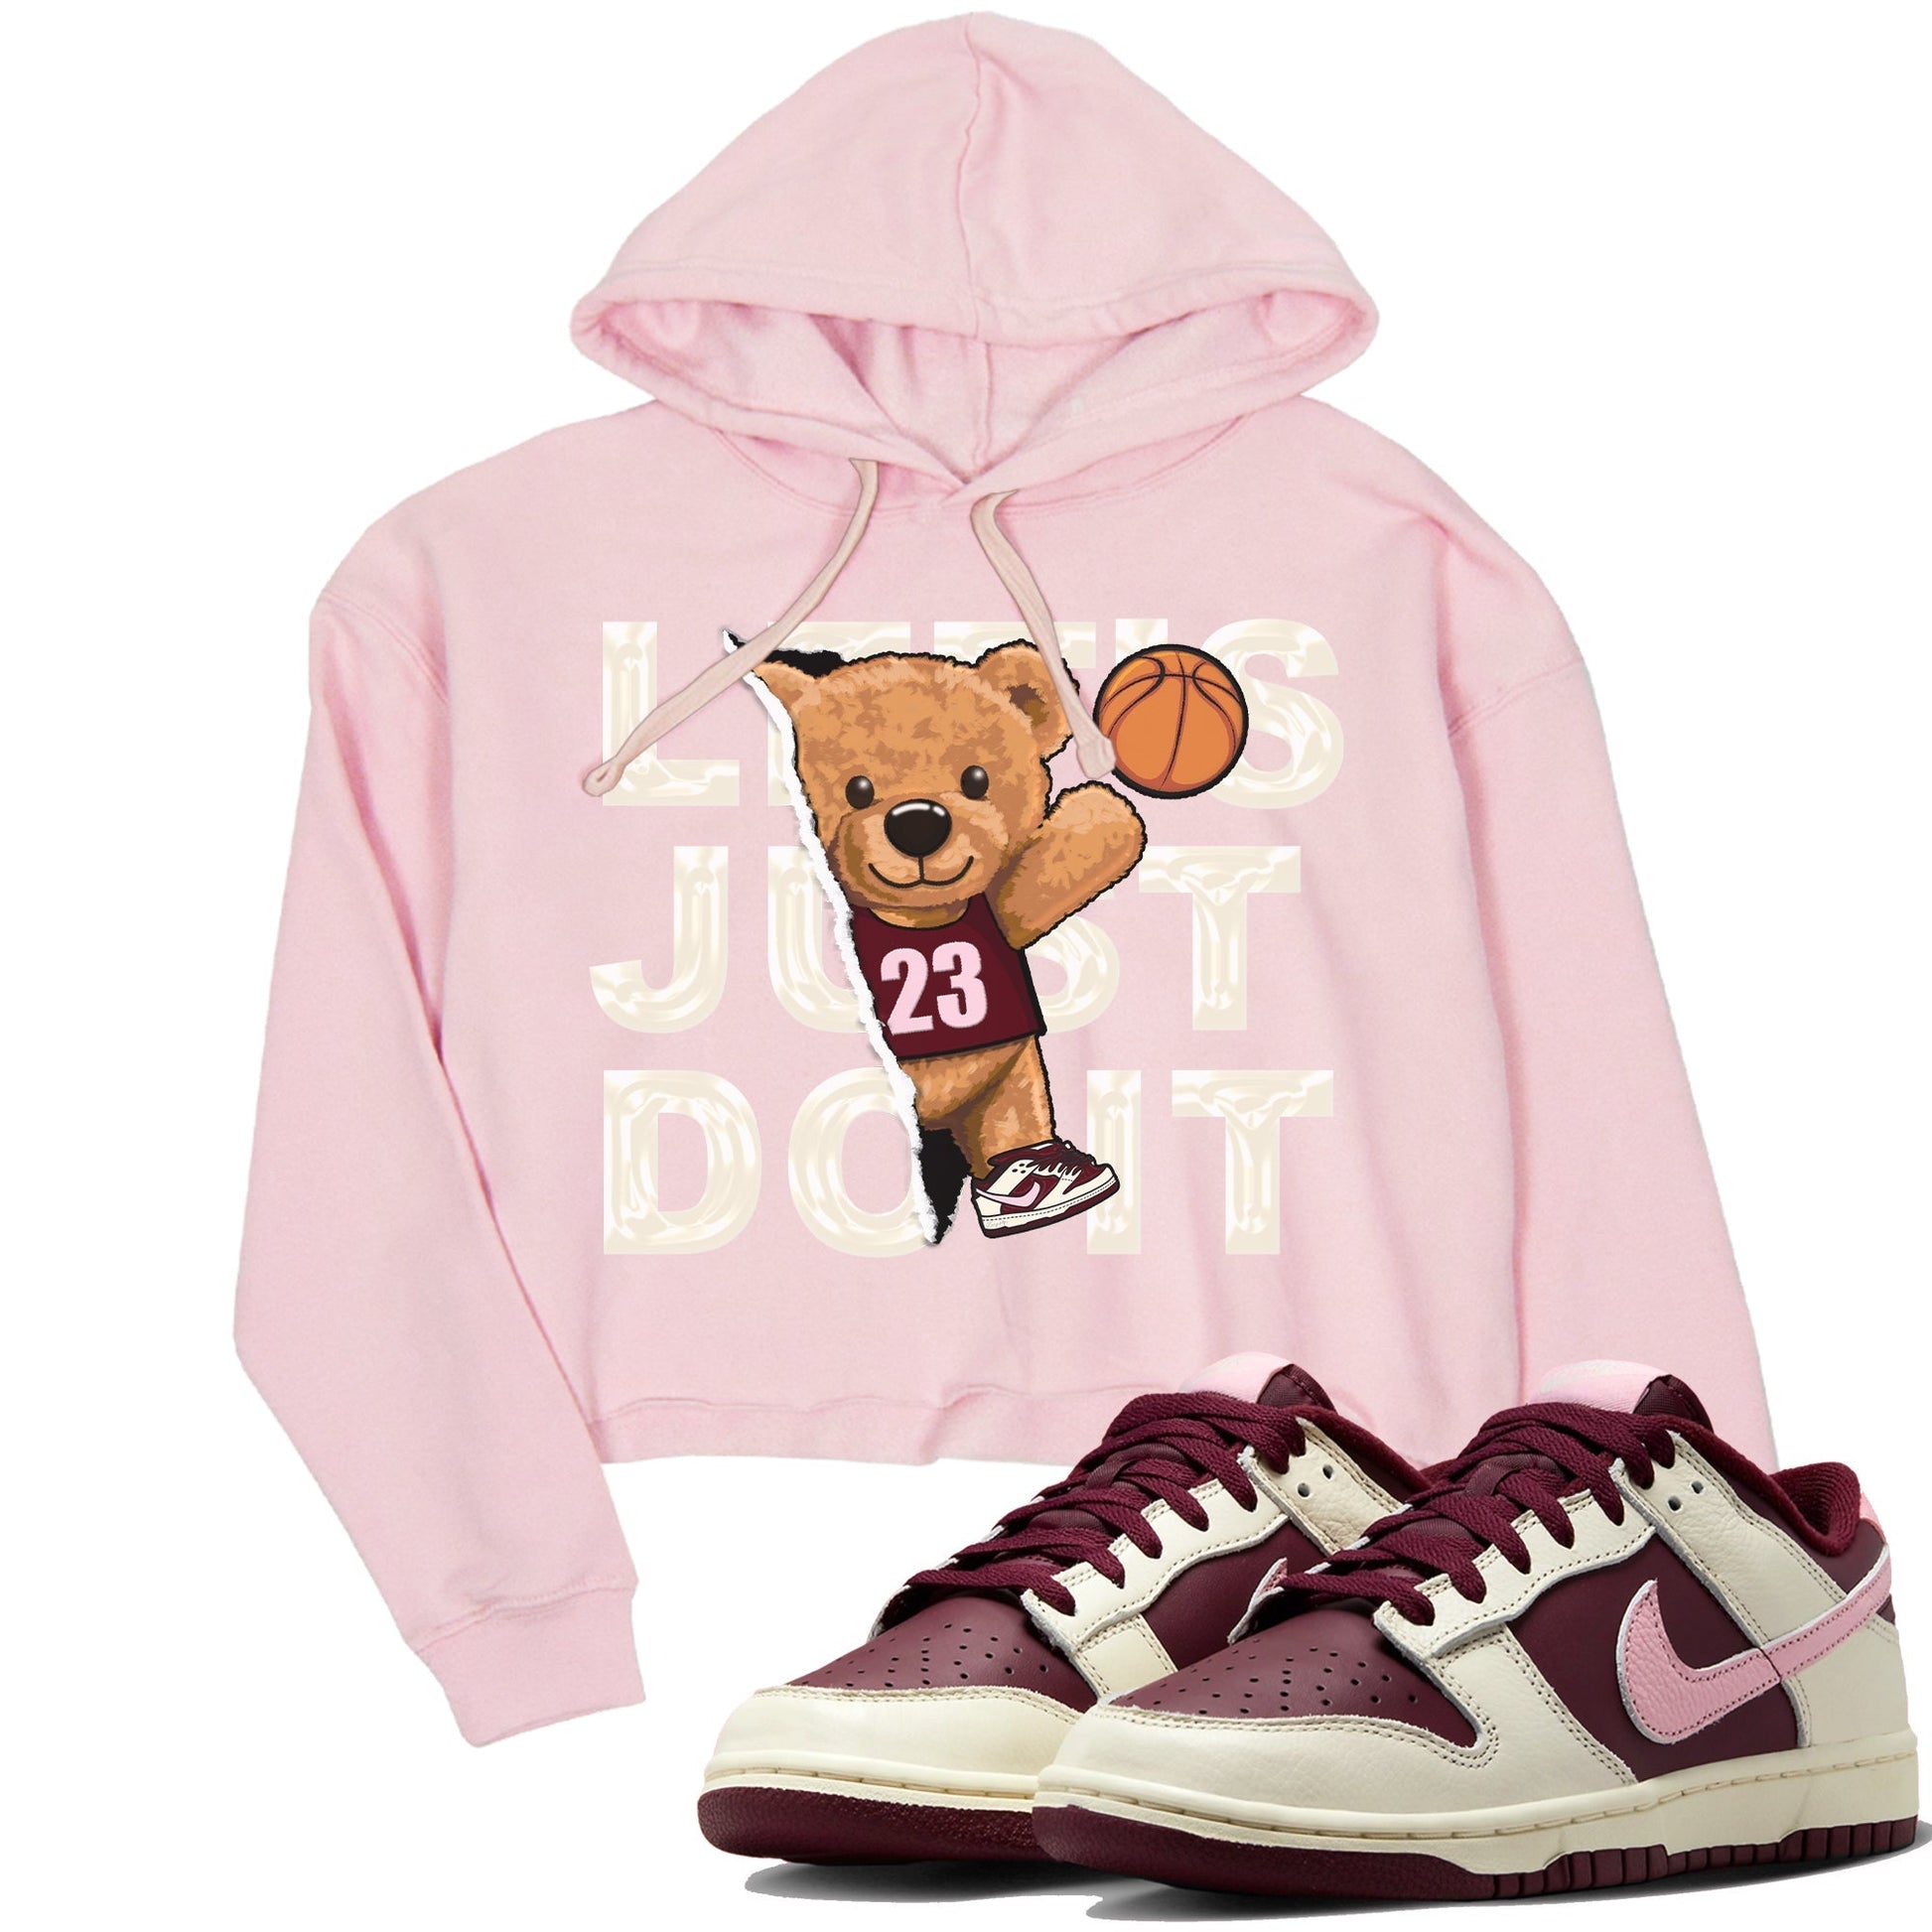 Dunk Valentines Day Sneaker Match Tees Rip Out Bear Sneaker Tees Nike Dunk Valentine's Day Sneaker SNRT Sneaker Tees Women's Shirts